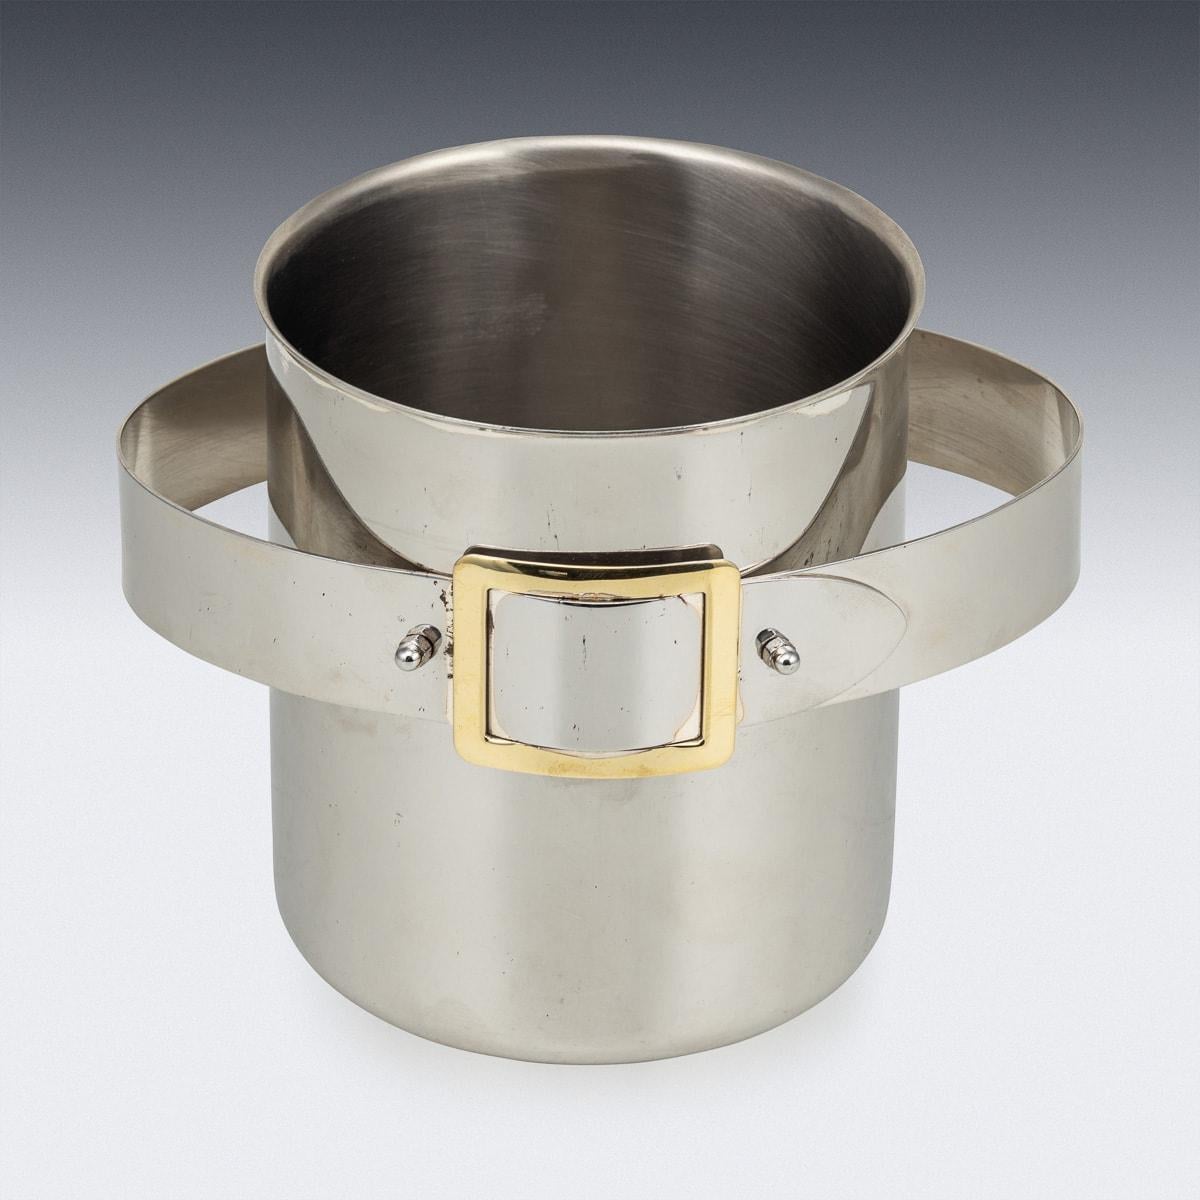 A superb mid-20th Century silver plated ice bucket. The bucket is adorned with a brass belt buckle detail and offers ample space to accommodate a bottle of champagne. It serves as an ideal enhancement for any home, whether contemporary or